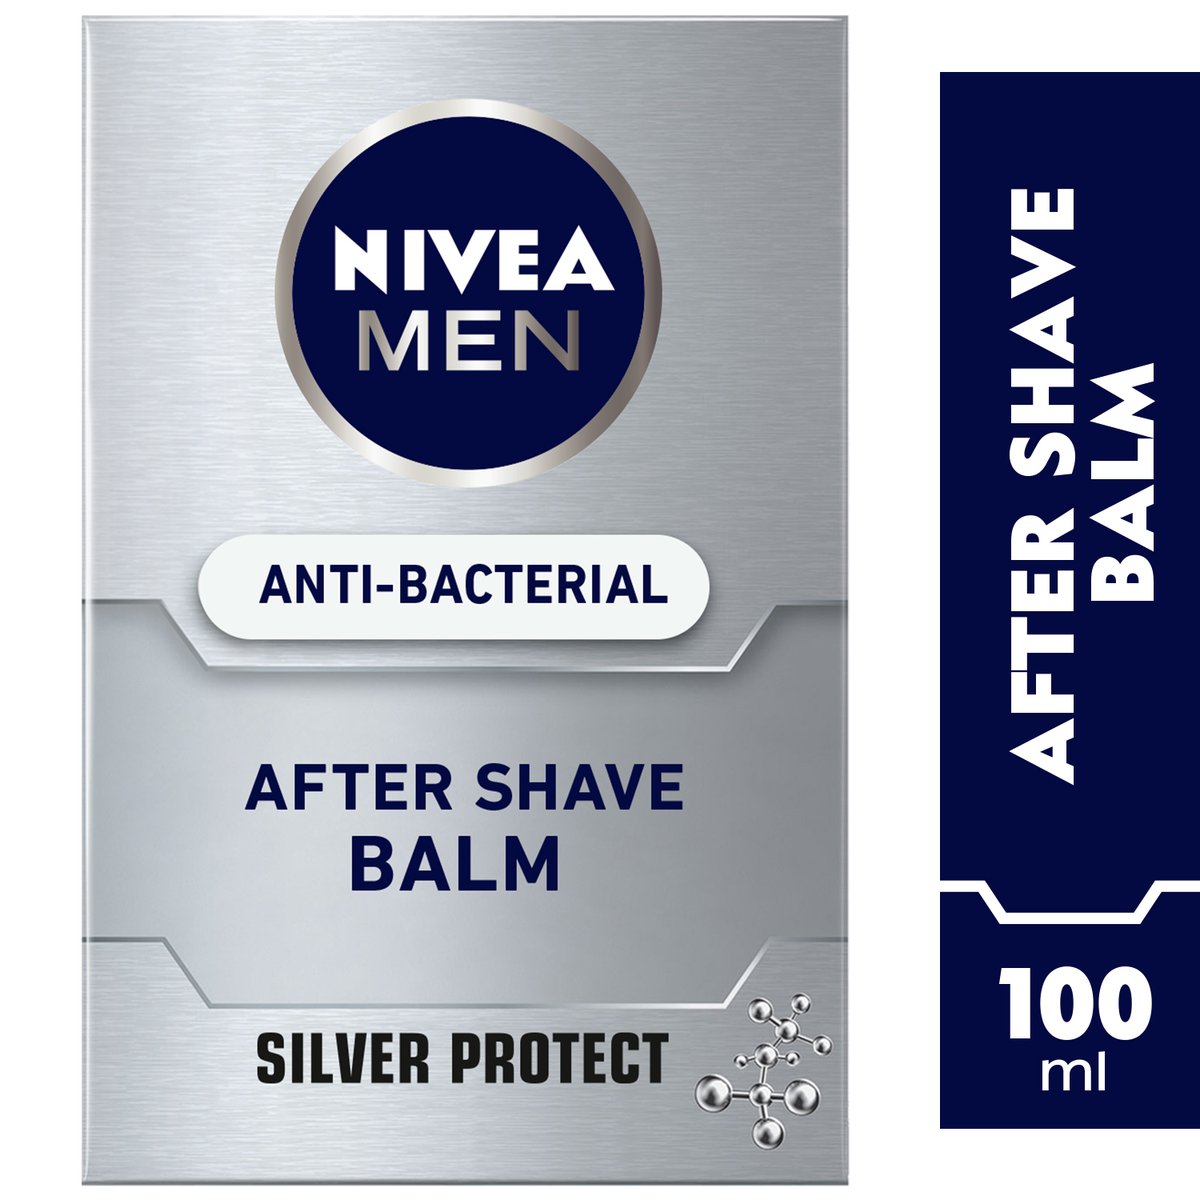 Nivea Men Anti-Bacterial After Shave Balm Silver Protect 100 ml